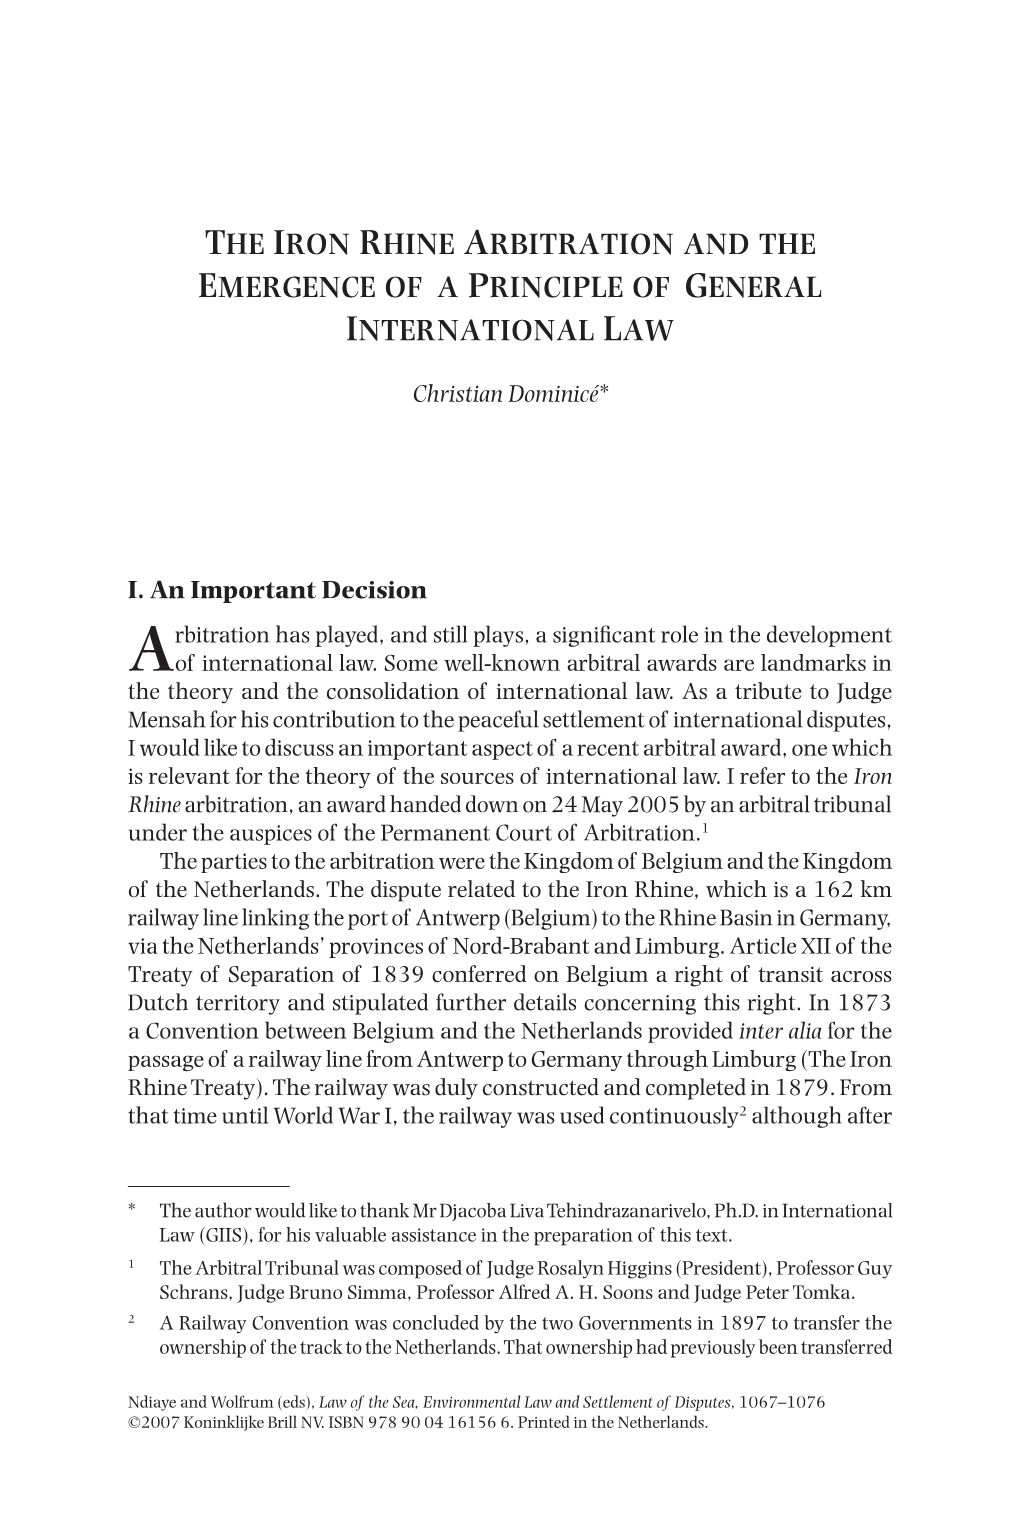 The Iron Rhine Arbitration and the Emergence of a Principle of General International Law